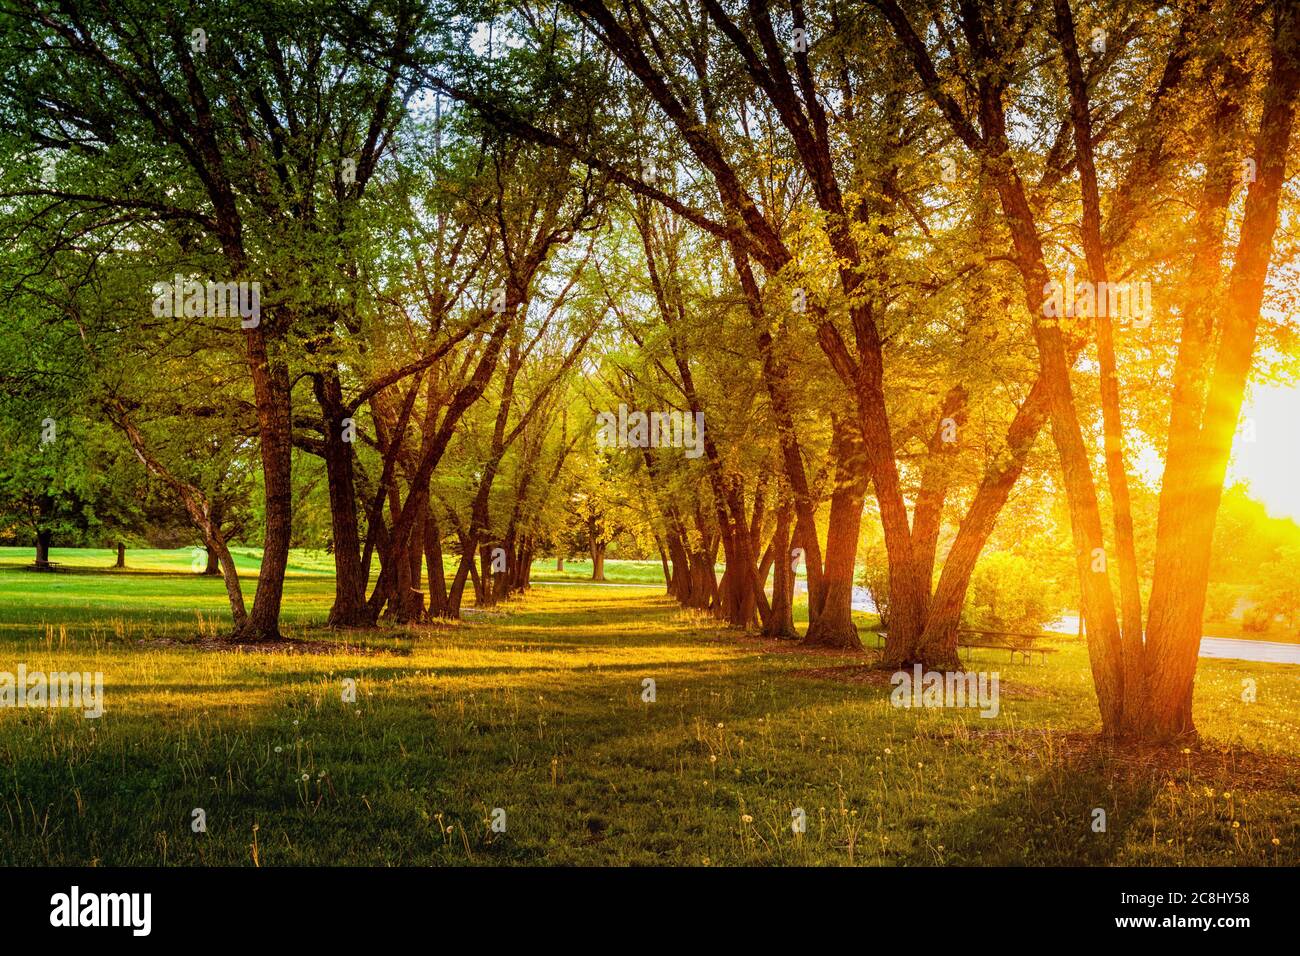 Tree lined path at sunset Stock Photo